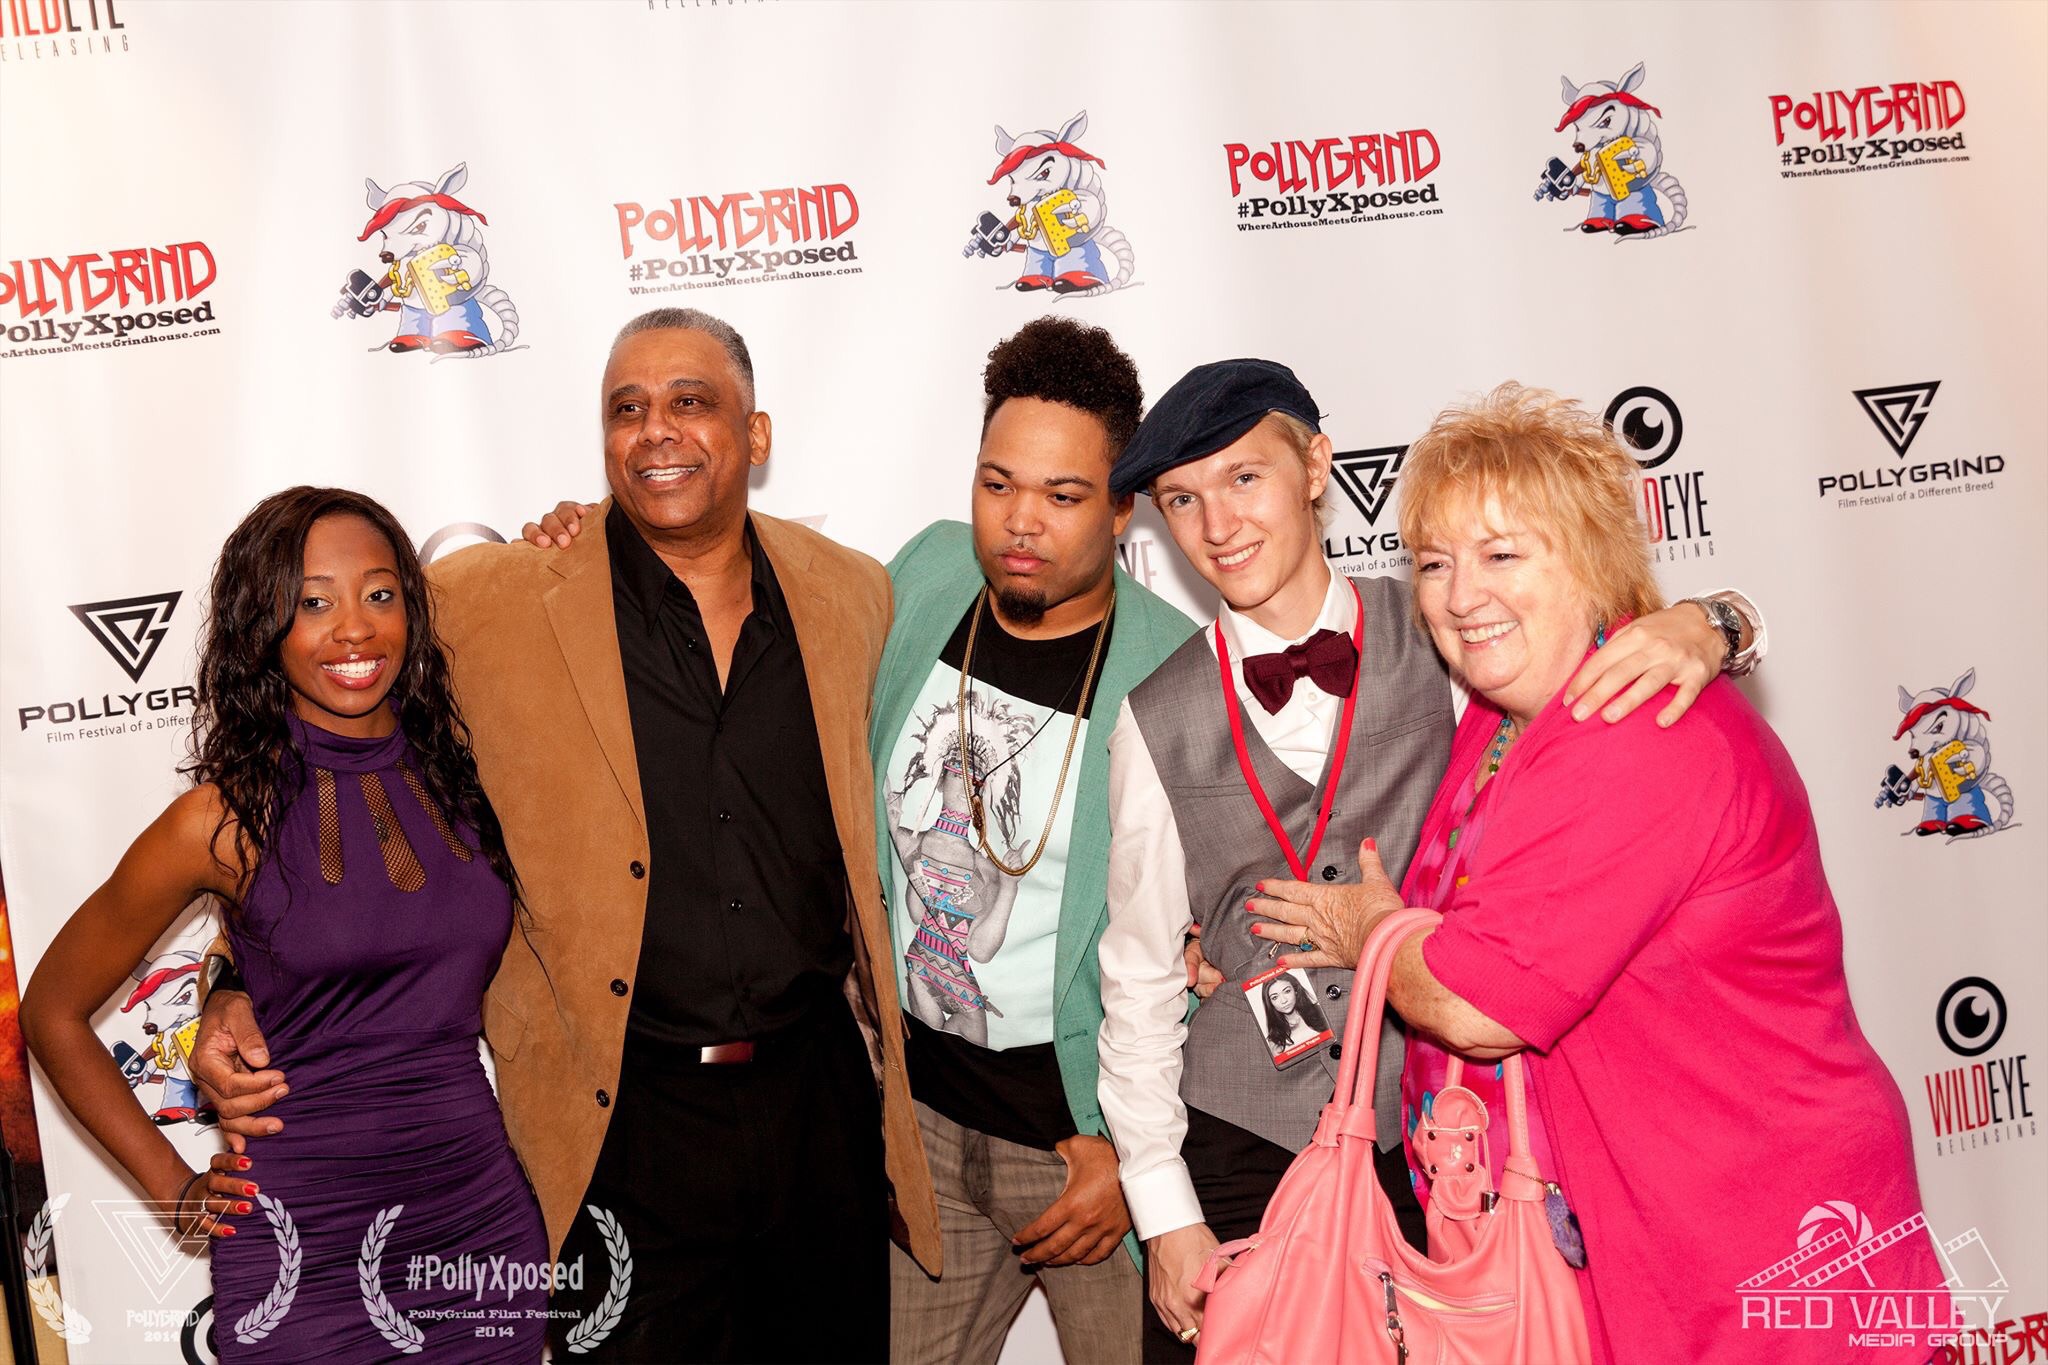 Joey Bell at the world premiere of HEIDI at the Galaxy Theaters in Green Valley as part of the Pollygrind Film Festival. HEIDI won for Best Nevada Feature. From left to right: Destiny Faith Nelson, Michael Montiero, Carl Windom, Joey Bell, and Lynne Tynan